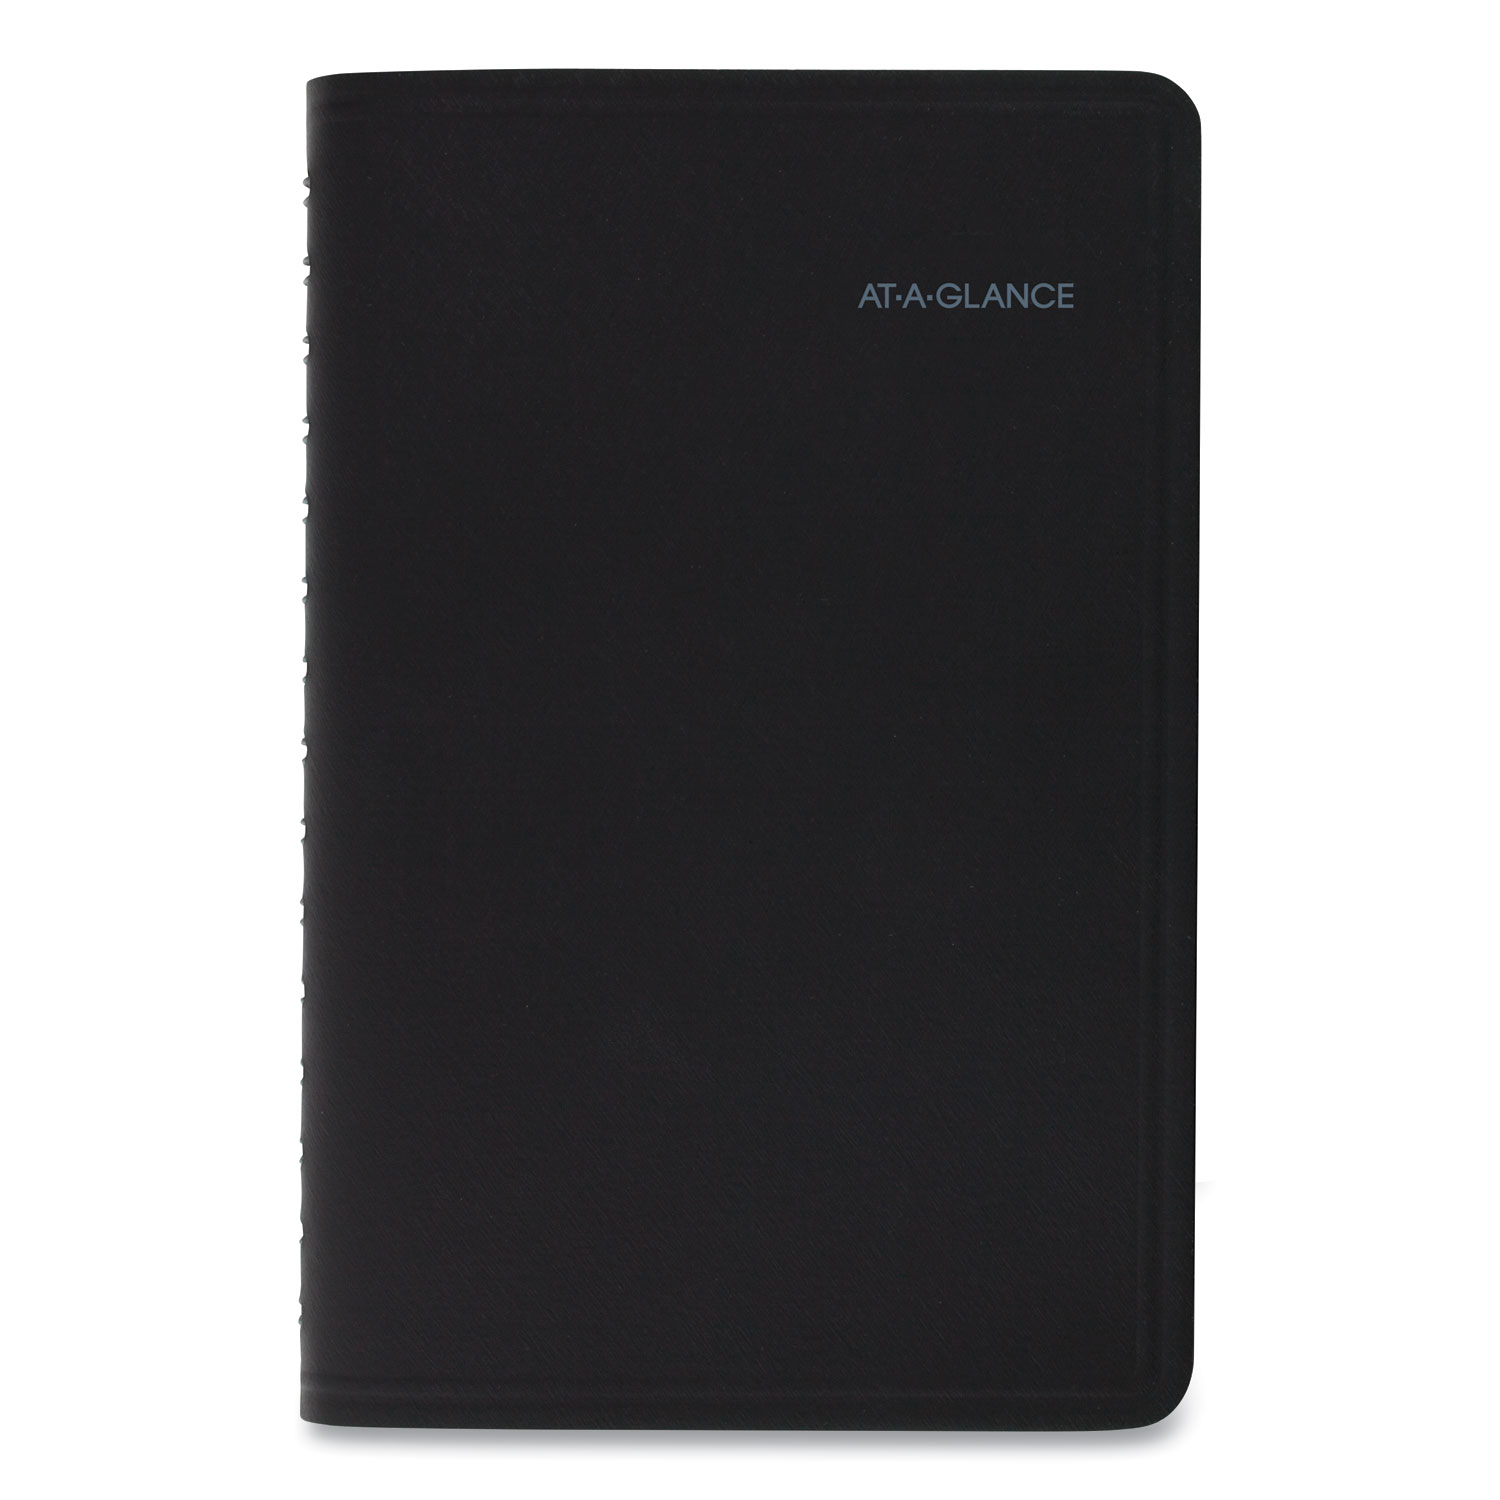  AT-A-GLANCE 760205 QuickNotes Weekly/Monthly Appointment Book, 8 x 4 7/8, Black, 2020 (AAG760205) 